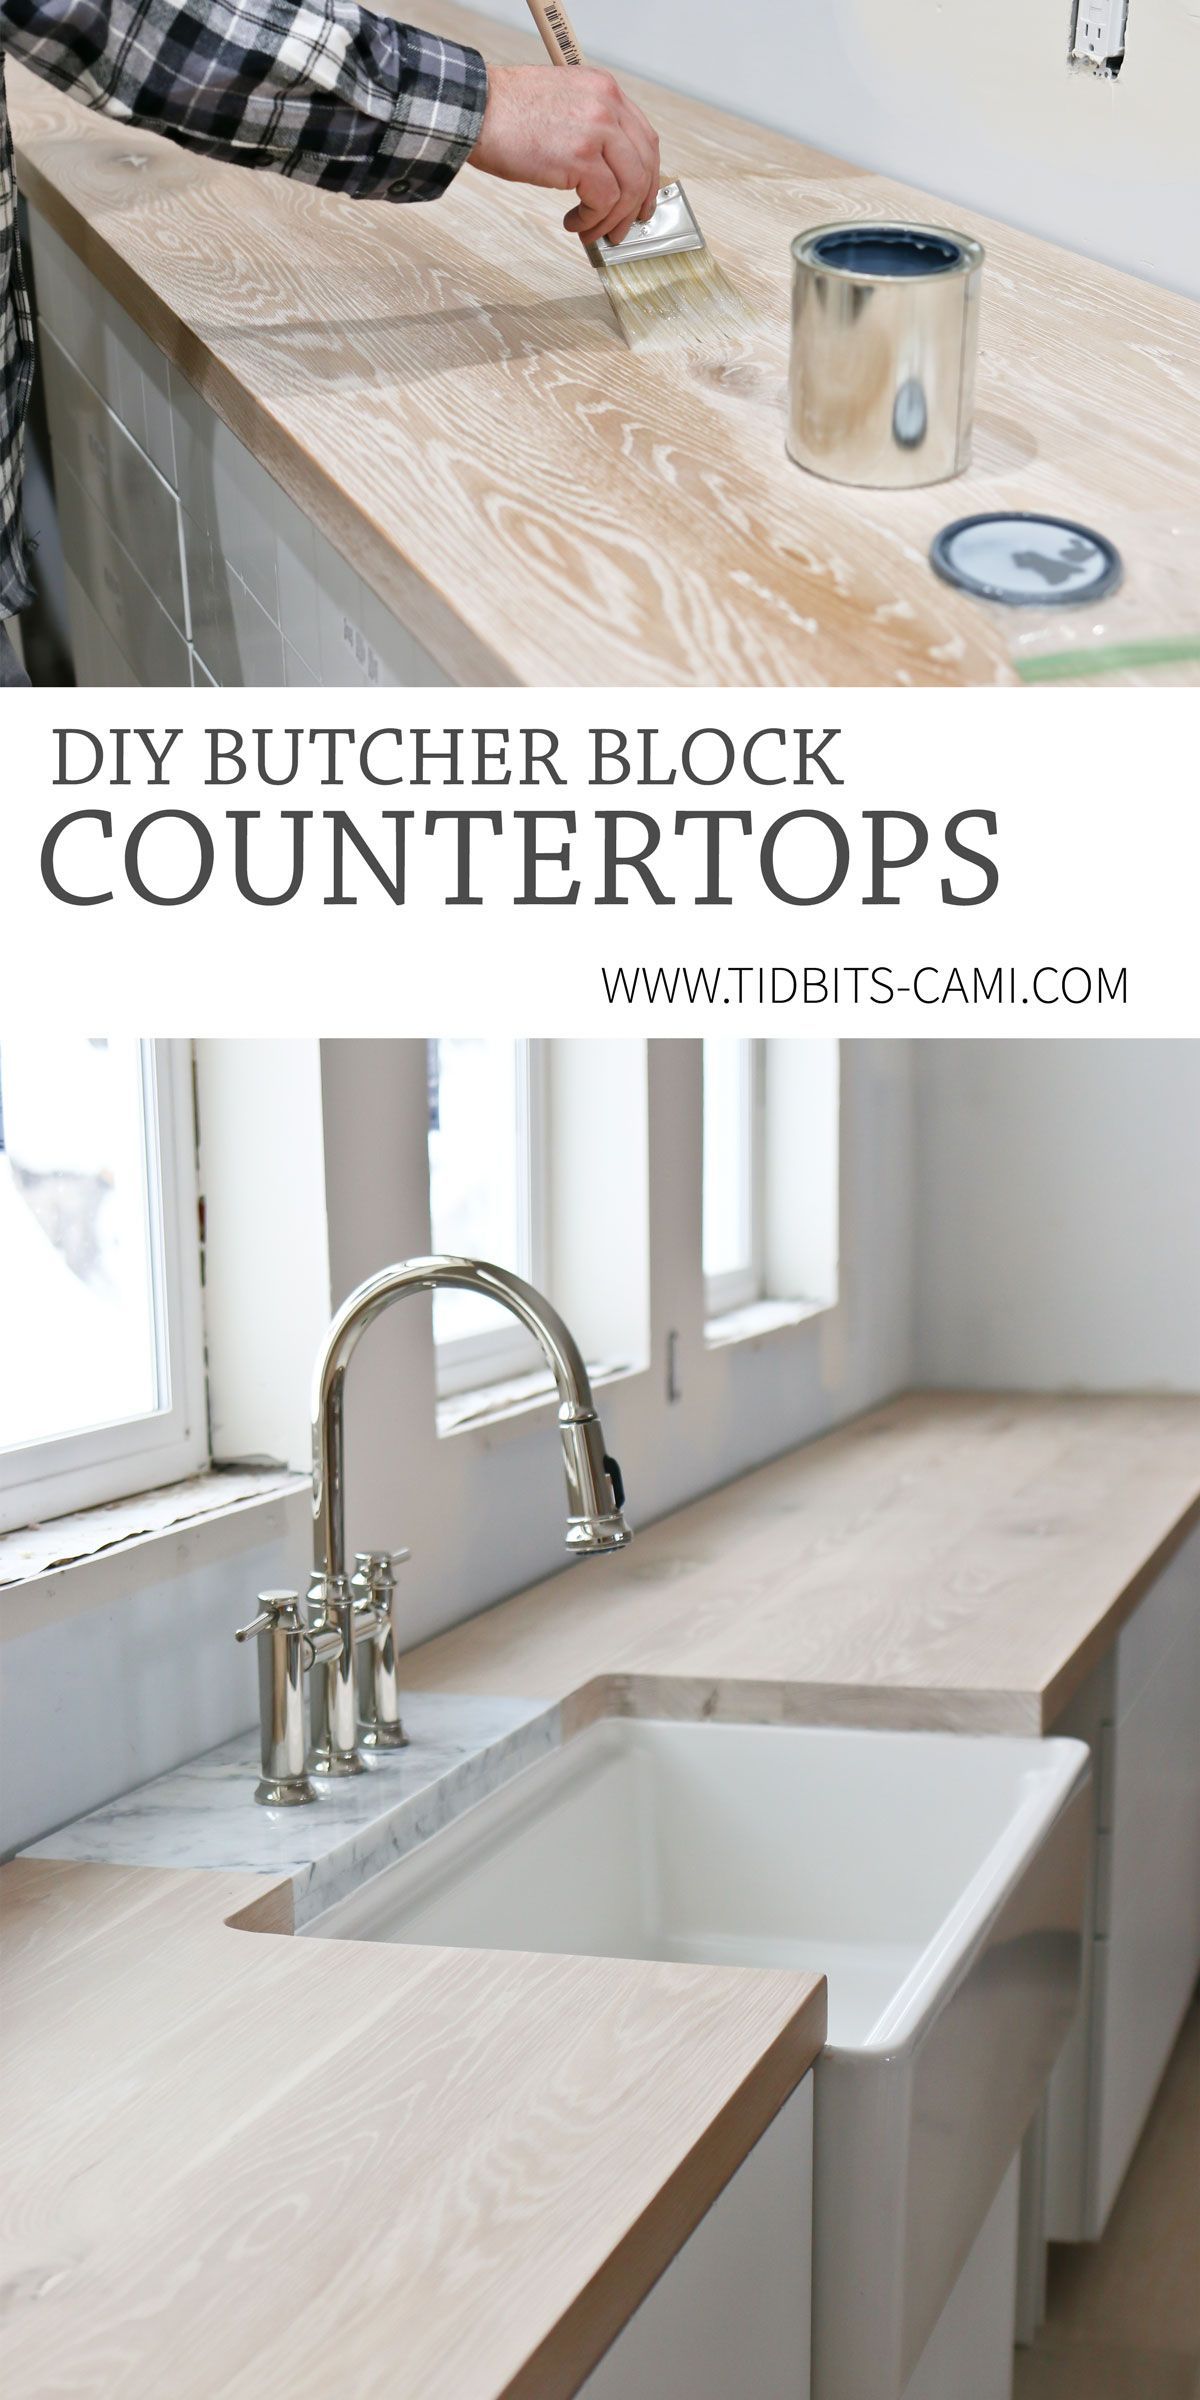 DIY Butcher Block Countertops | Oh, yes you can! - Tidbits - DIY Butcher Block Countertops | Oh, yes you can! - Tidbits -   17 diy House updates ideas